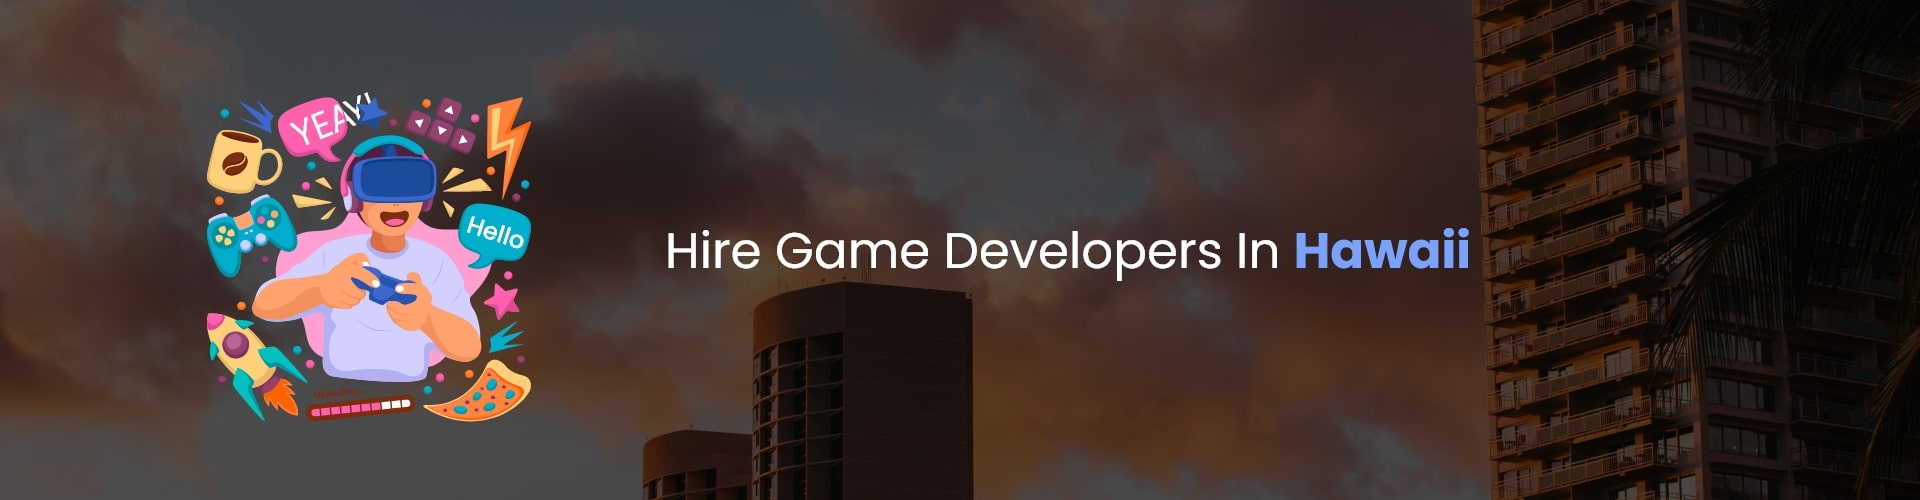 hire game developers in hawaii